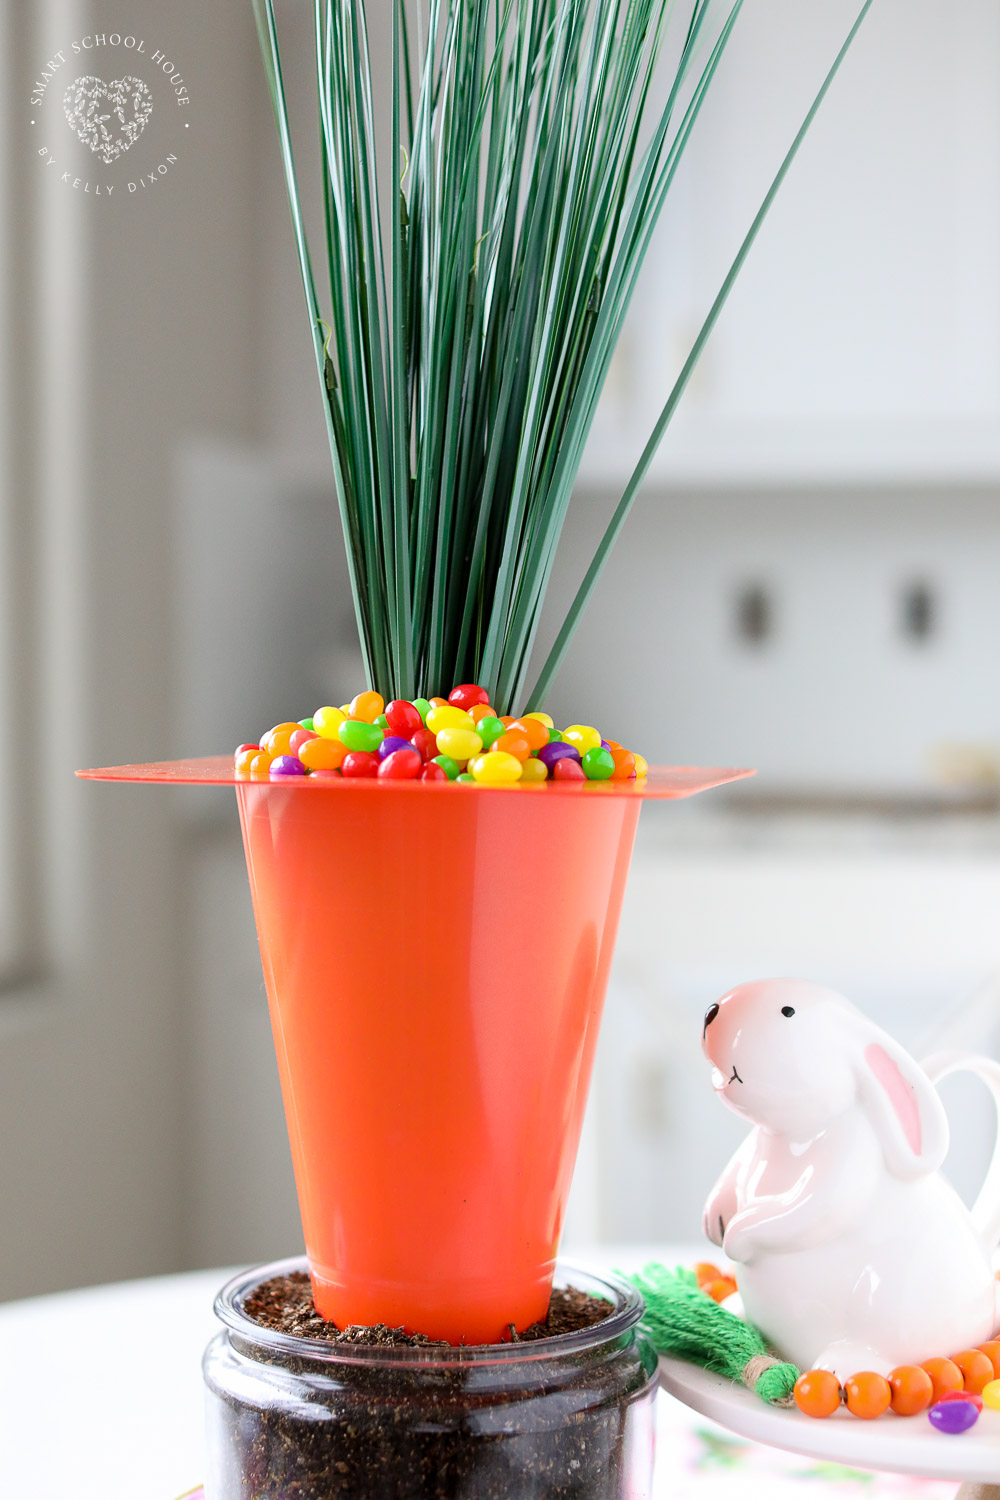 Use an orange playground cone to make a Giant Carrot Centerpiece for the Easter table! This dollar store centerpiece is filled with Jelly Beans!